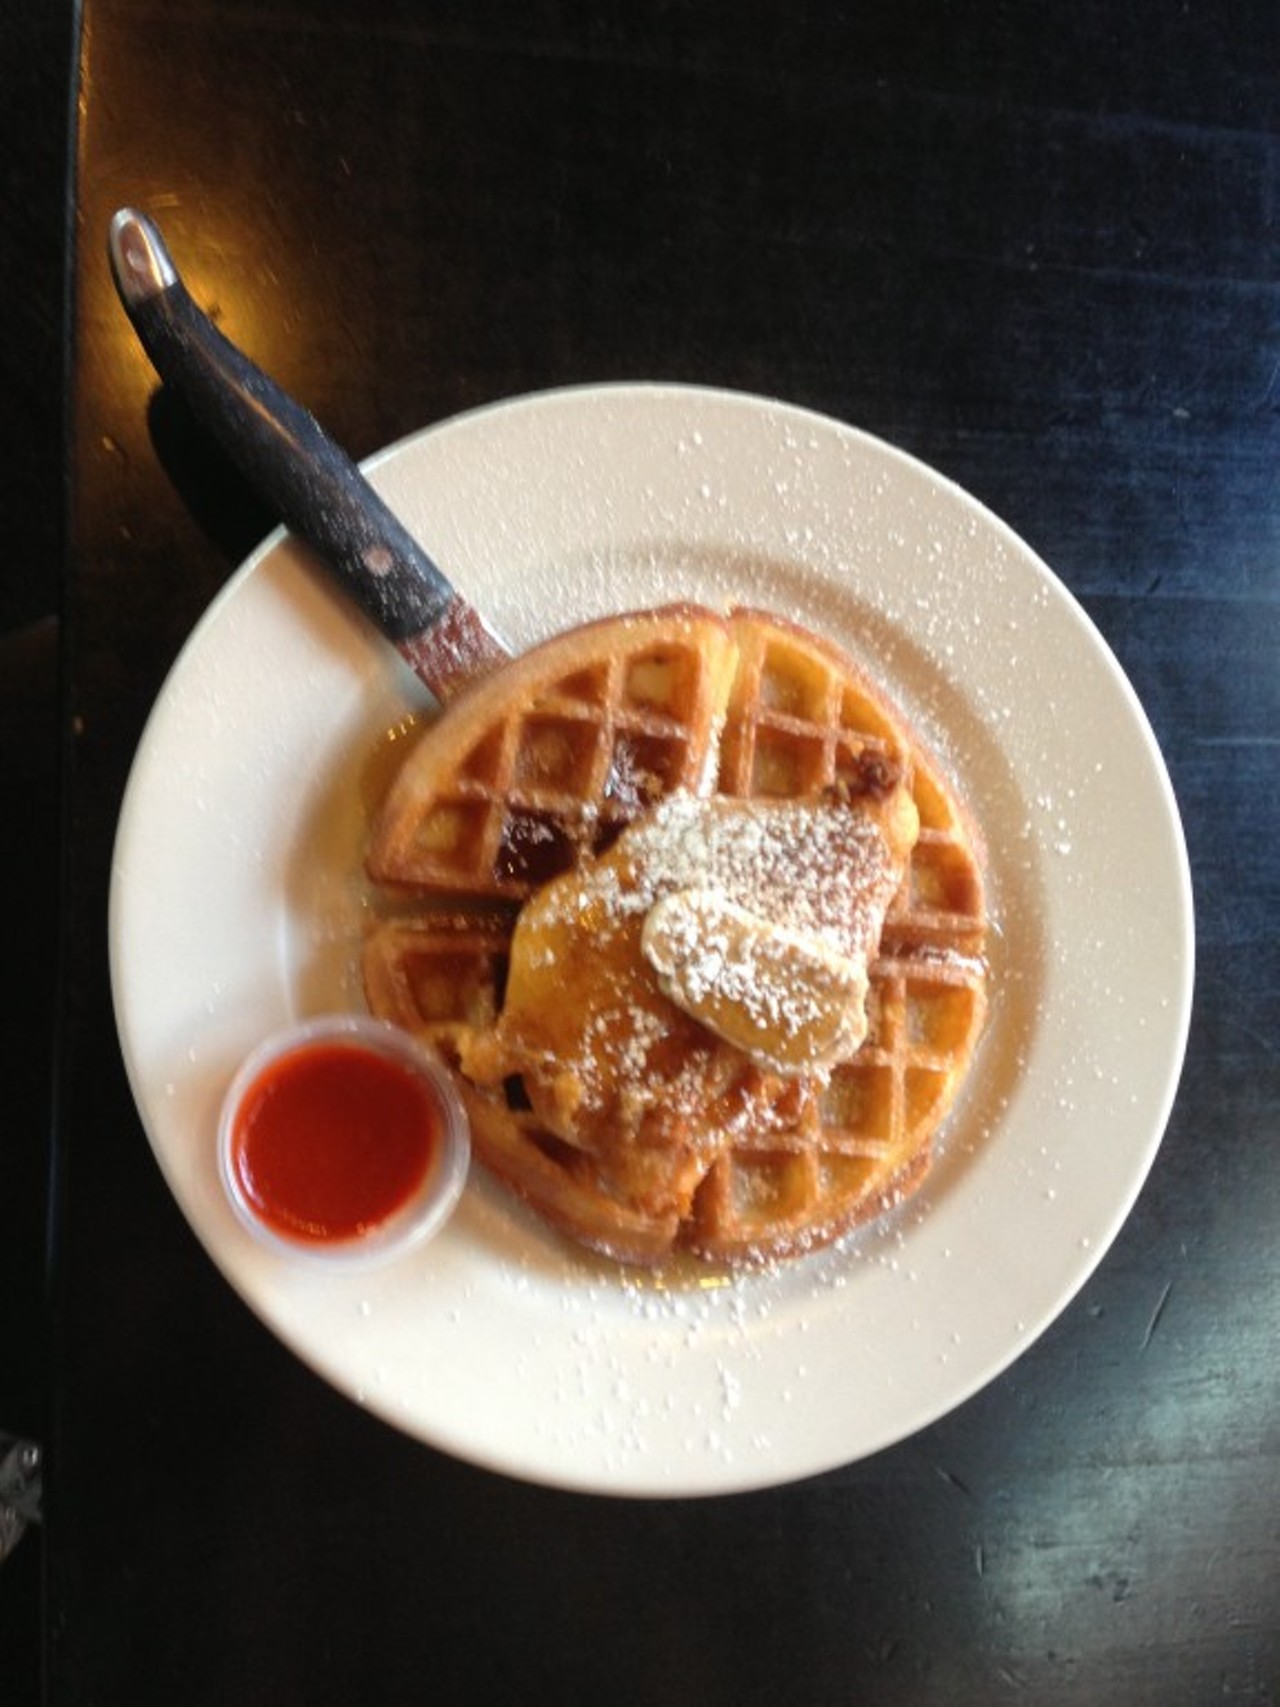 South Side - (2207 West 11th Street) - Who doesn't crave chicken and waffles at 1a.m.? Good thing South Side's late night menu has you covered, serving food until 2 a.m. nightly.